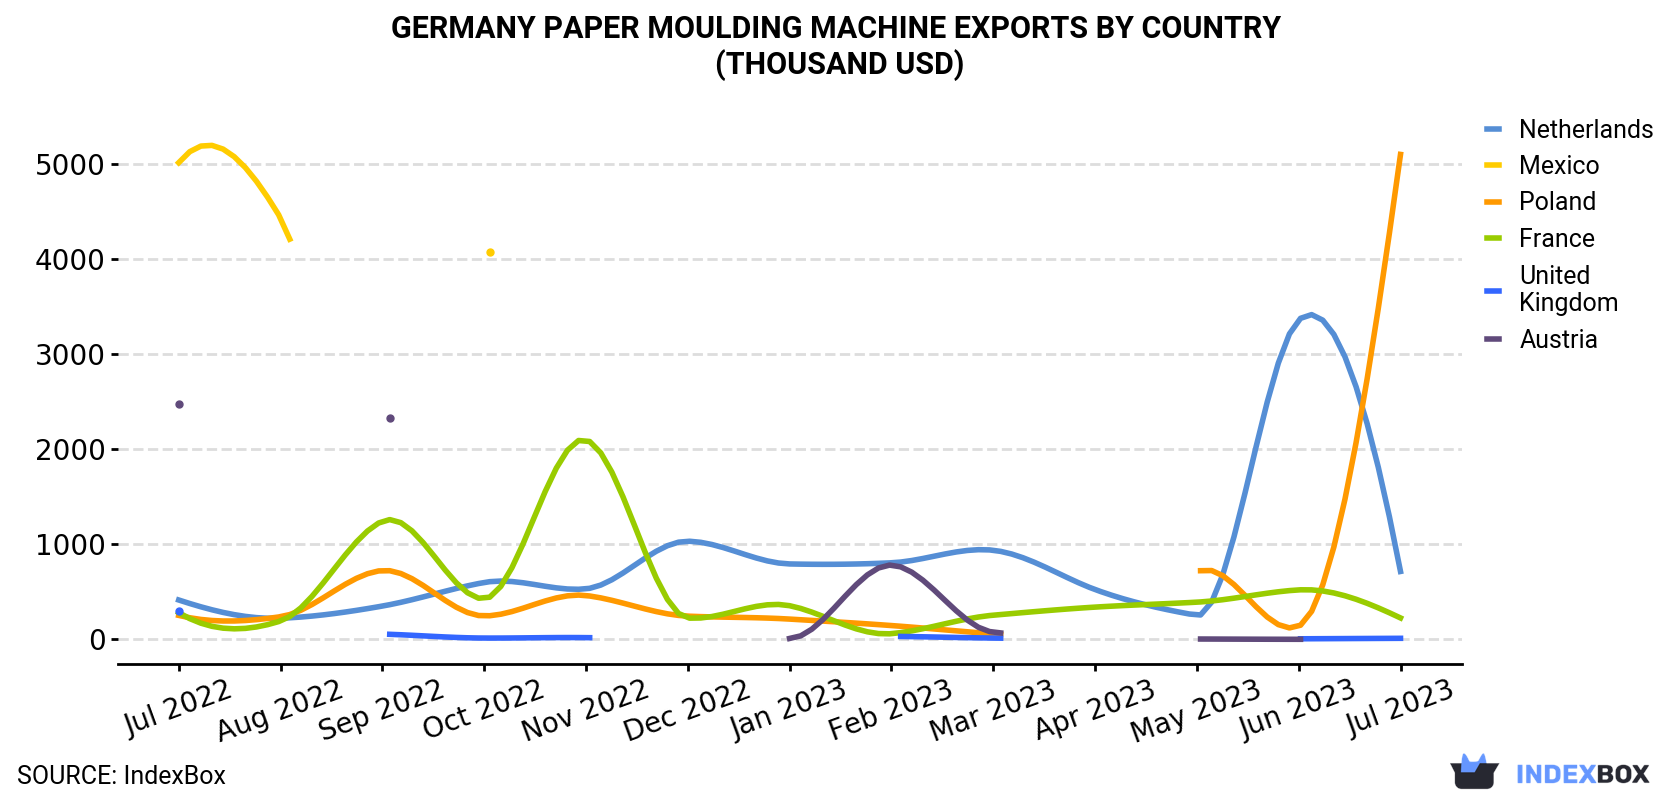 Germany Paper Moulding Machine Exports By Country (Thousand USD)